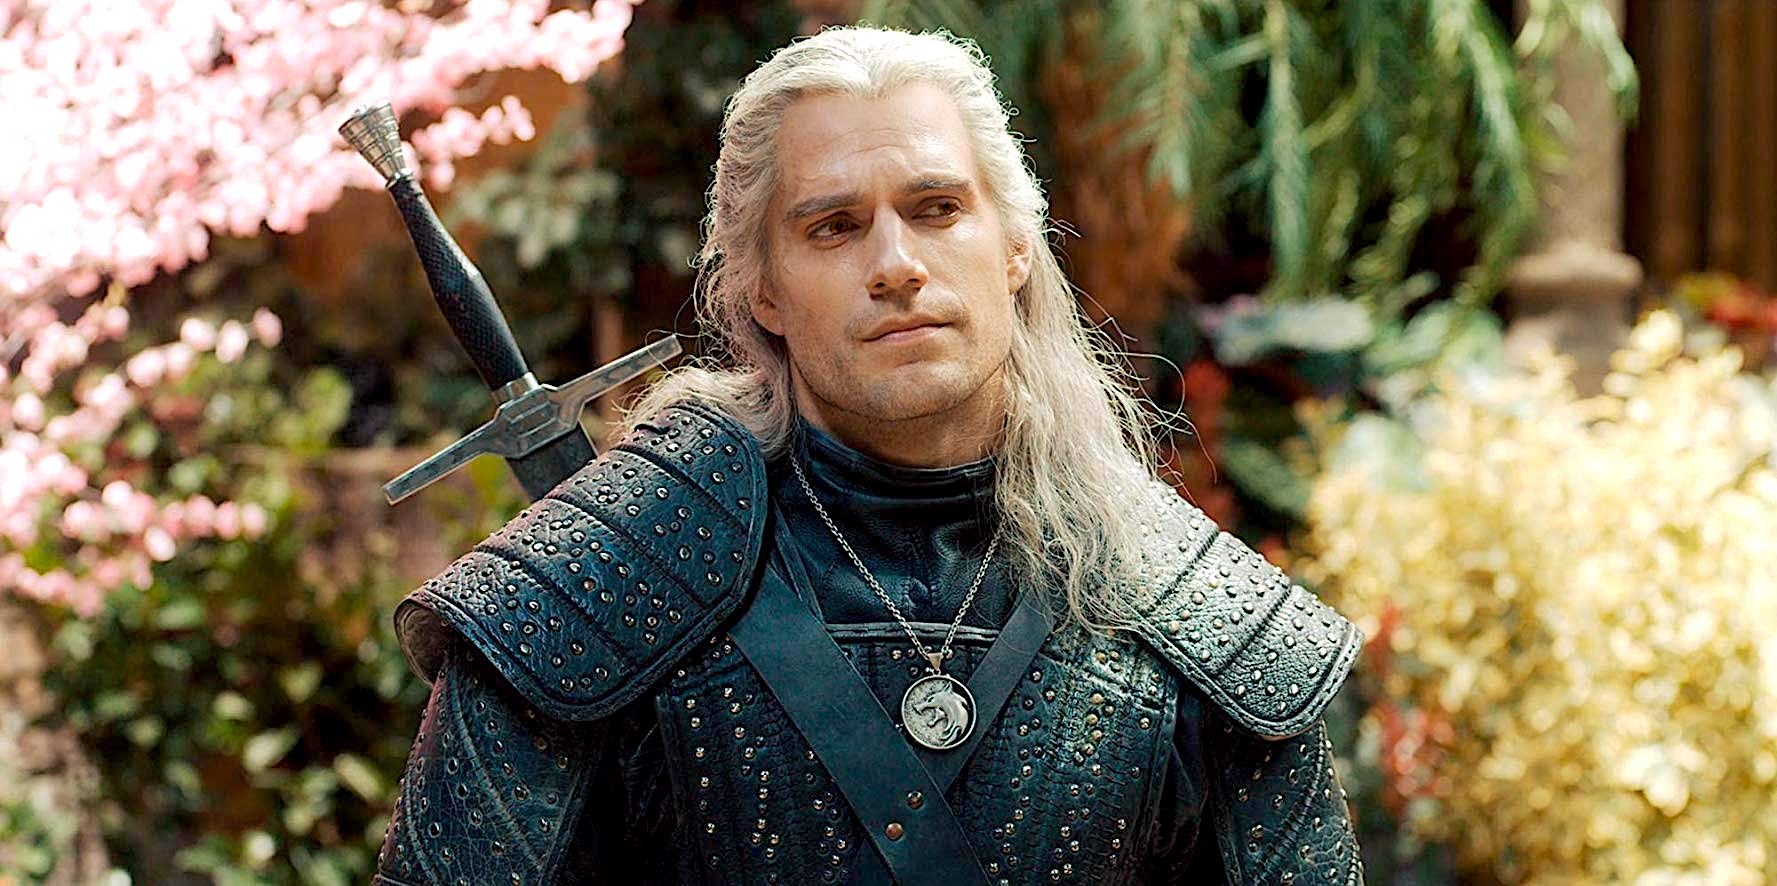 Henry Cavill in “The Witcher” —PHOTOS BY NETFLIX